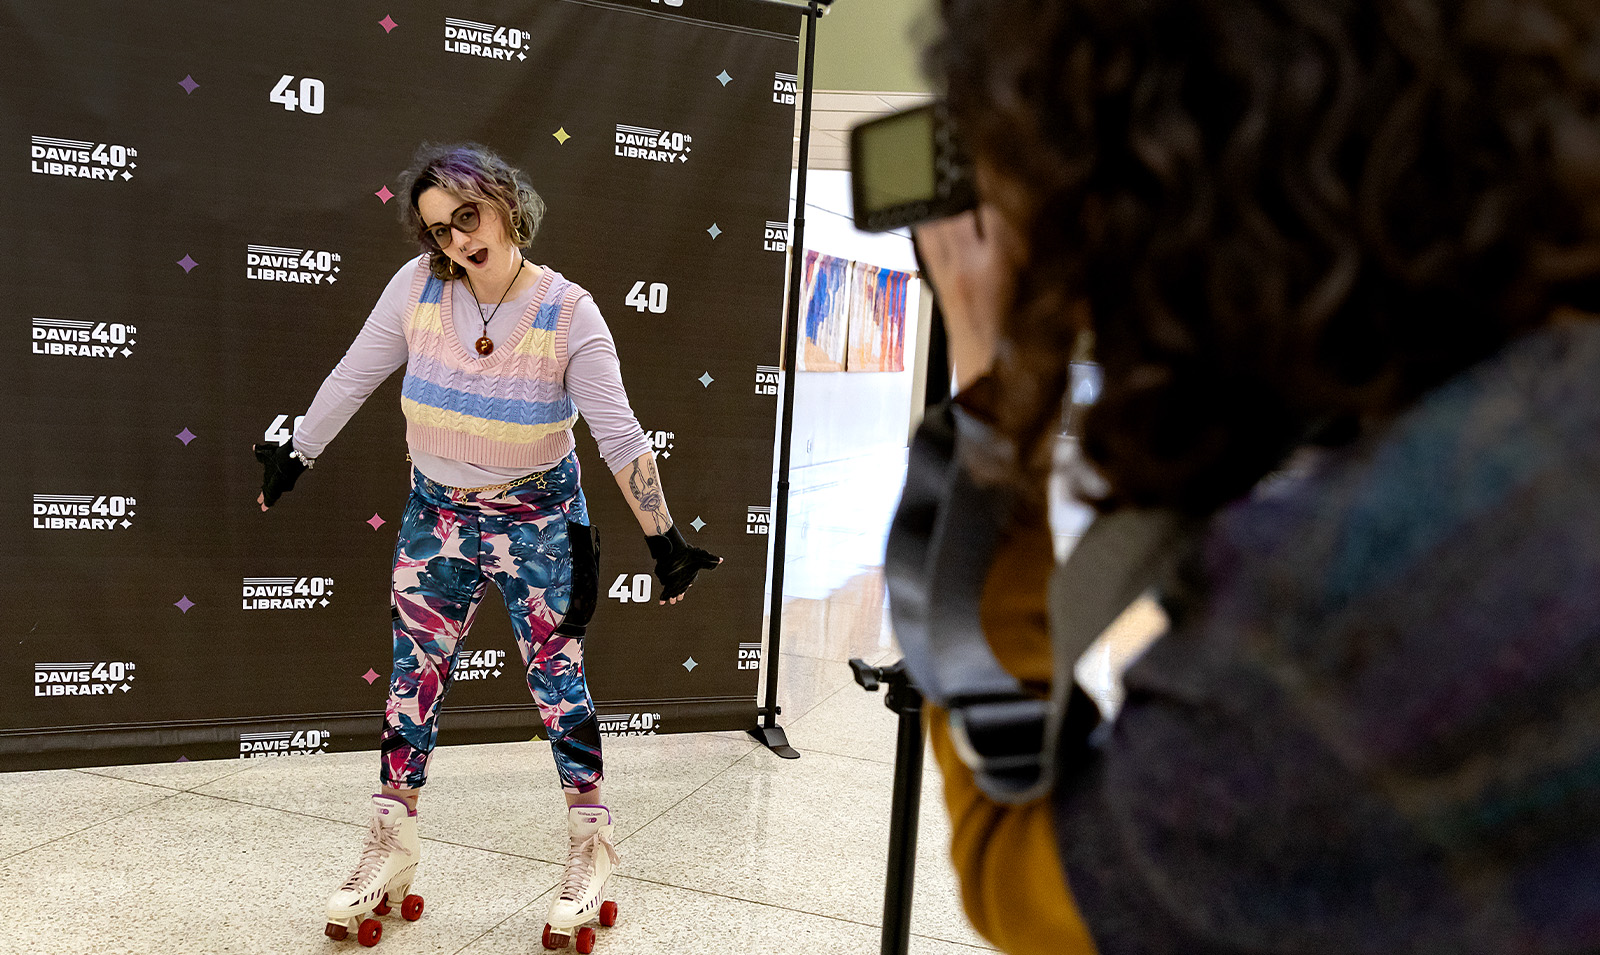 A student dressed in 1980s attire and rollerskates getting her picture taken.